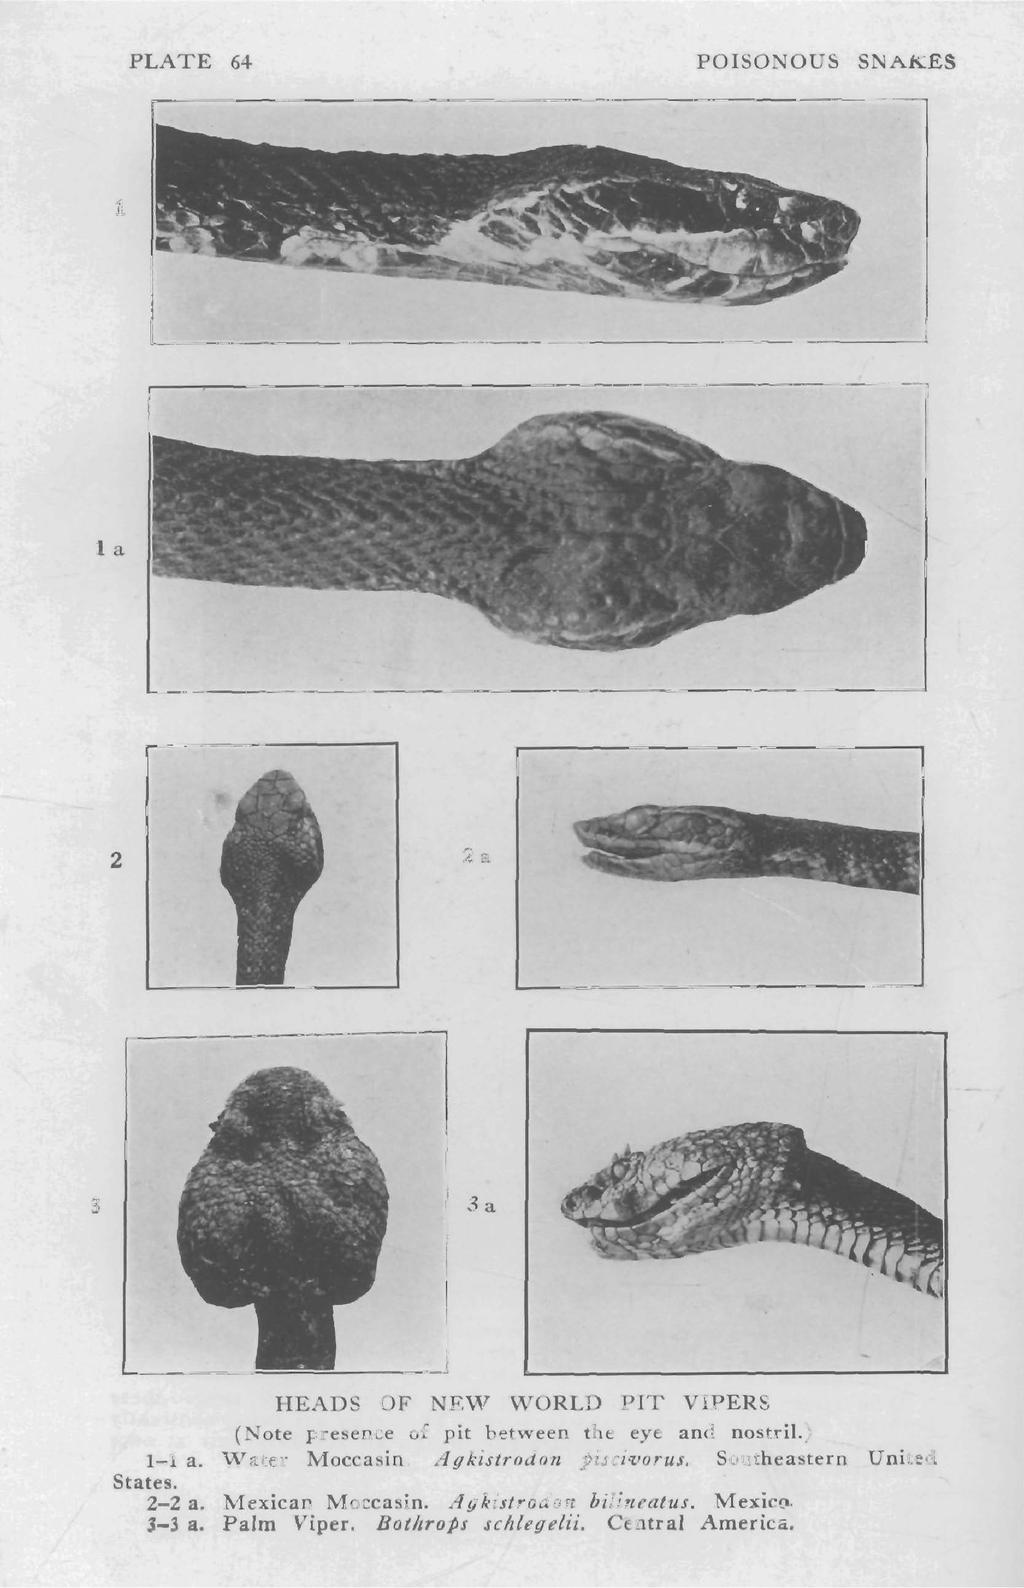 PLATE 64 POISONOUS SNAKES 1 1 a 2 2a 3 3a HEADS OF NEW WORLD PIT VIPERS (Note presence of pit between the eye and nostril.) 1-1 a. Water Moccasin.